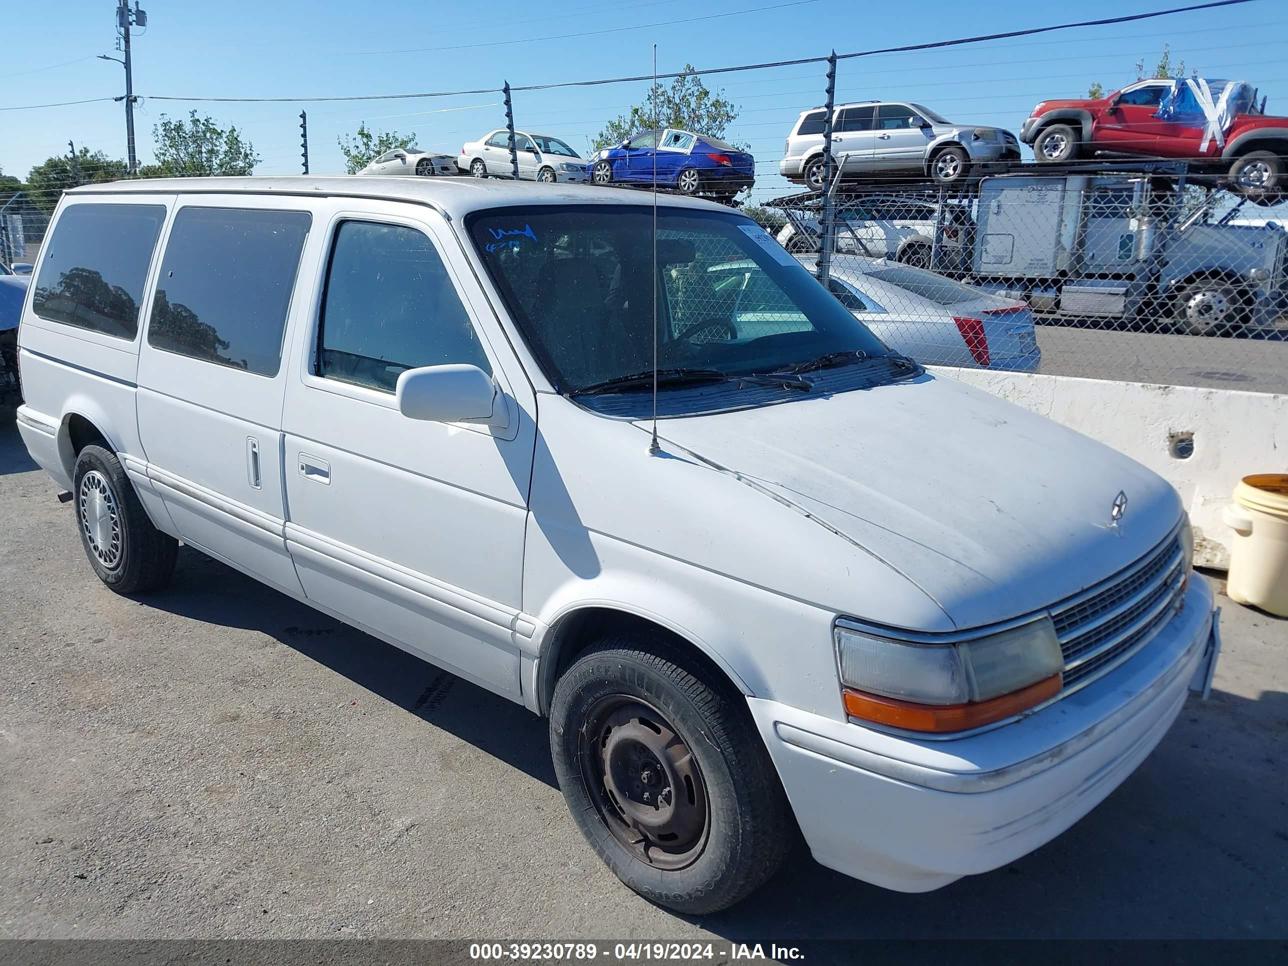 vin: 1P4GH4438NX111425 1P4GH4438NX111425 1992 plymouth  3000 for Sale in 94565, 2780 Willow Pass Road, Bay Point, California, USA